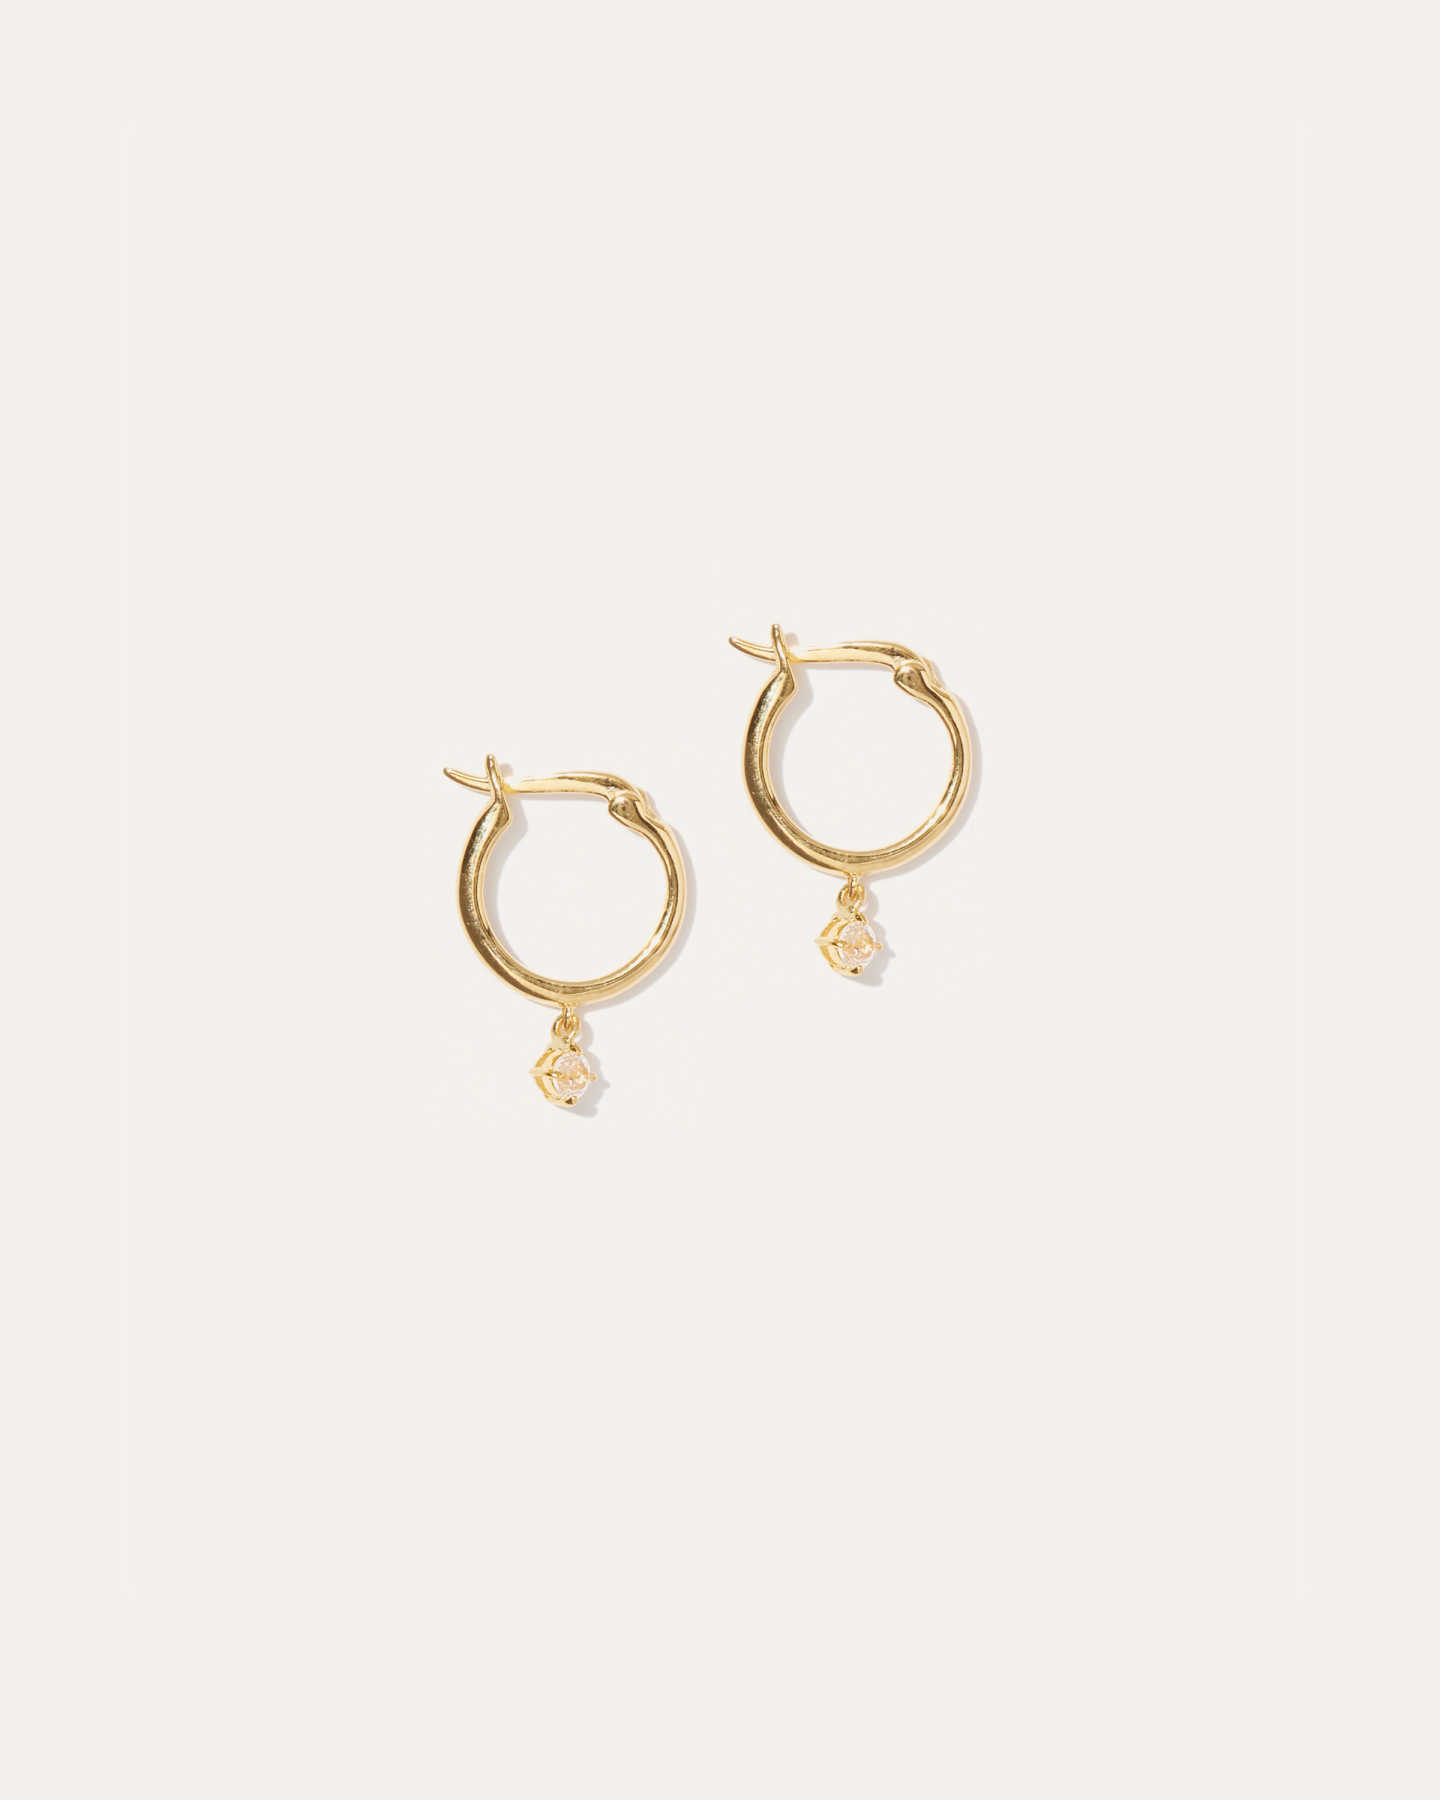 You May Also Like - White Sapphire Drop Hoops - Gold Vermeil